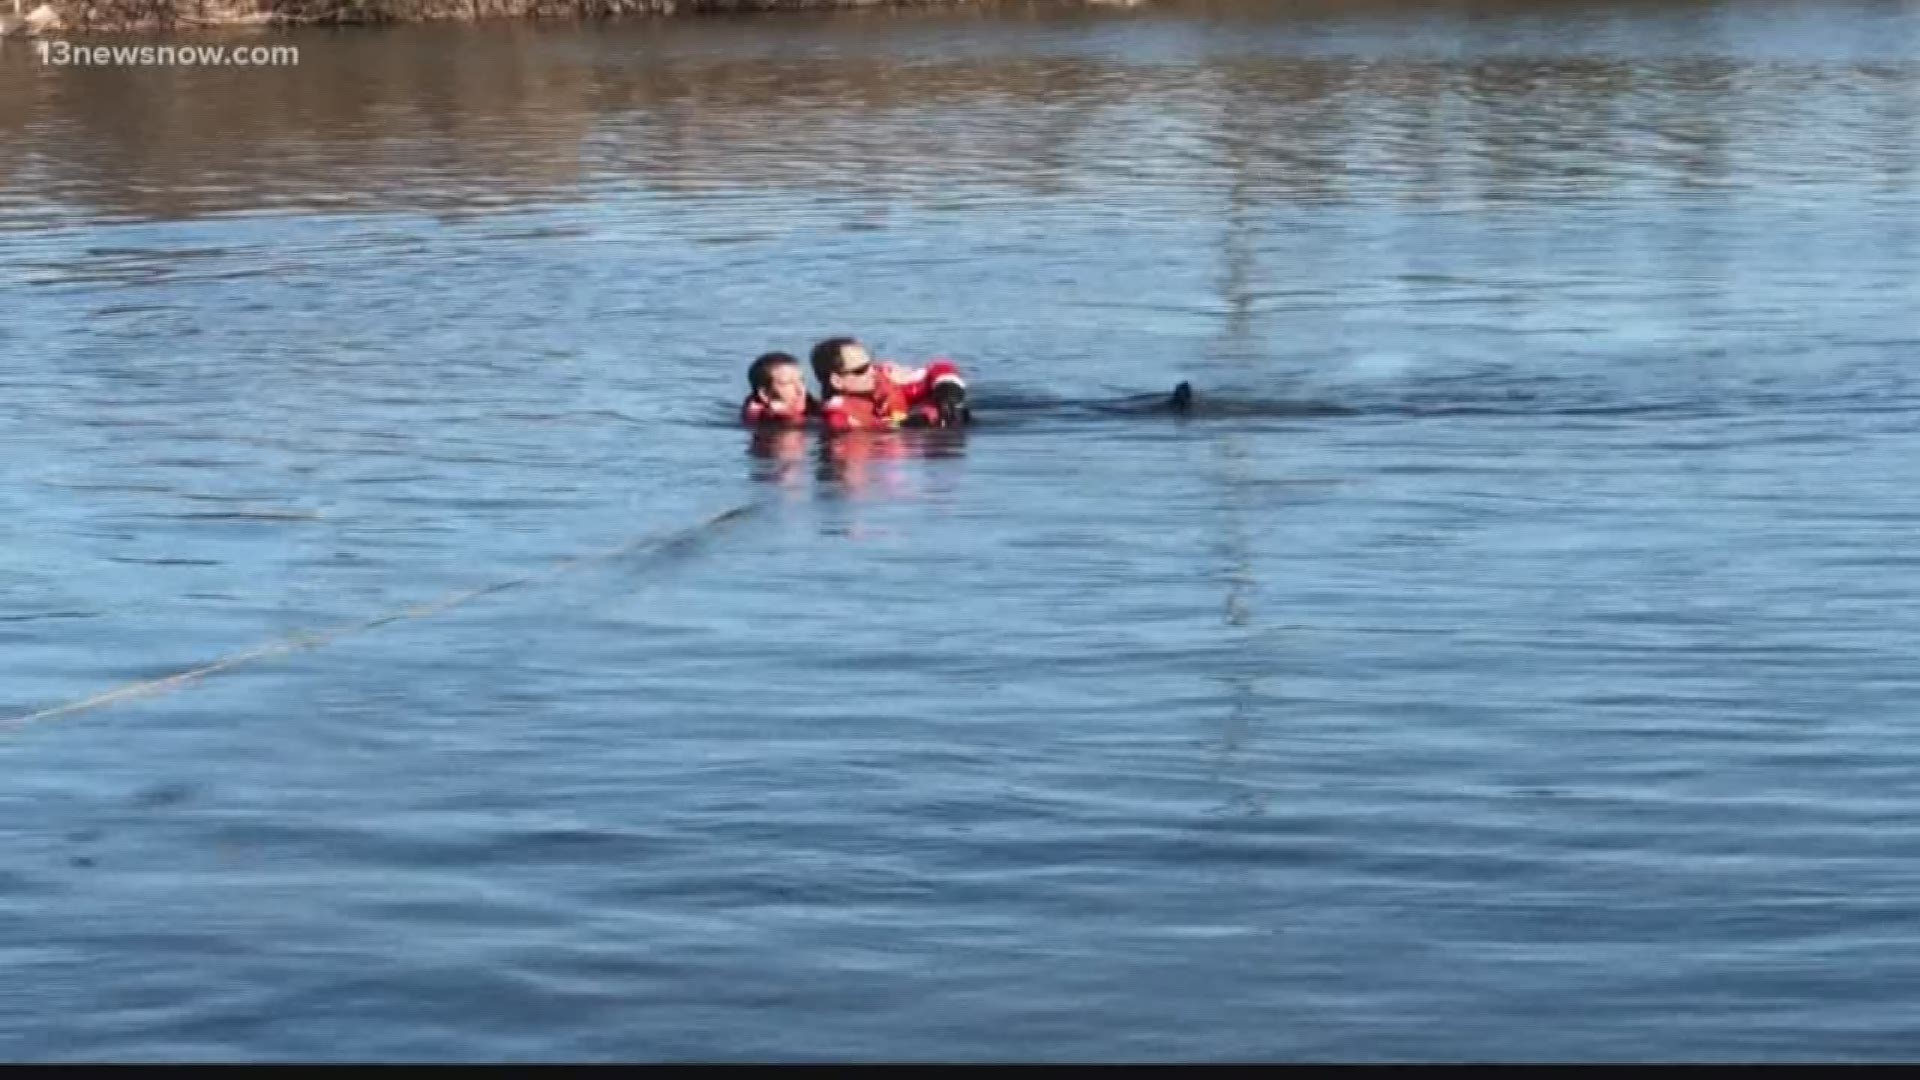 The Virginia Beach Fire Department trained for its cold water rescue skills Wednesday.